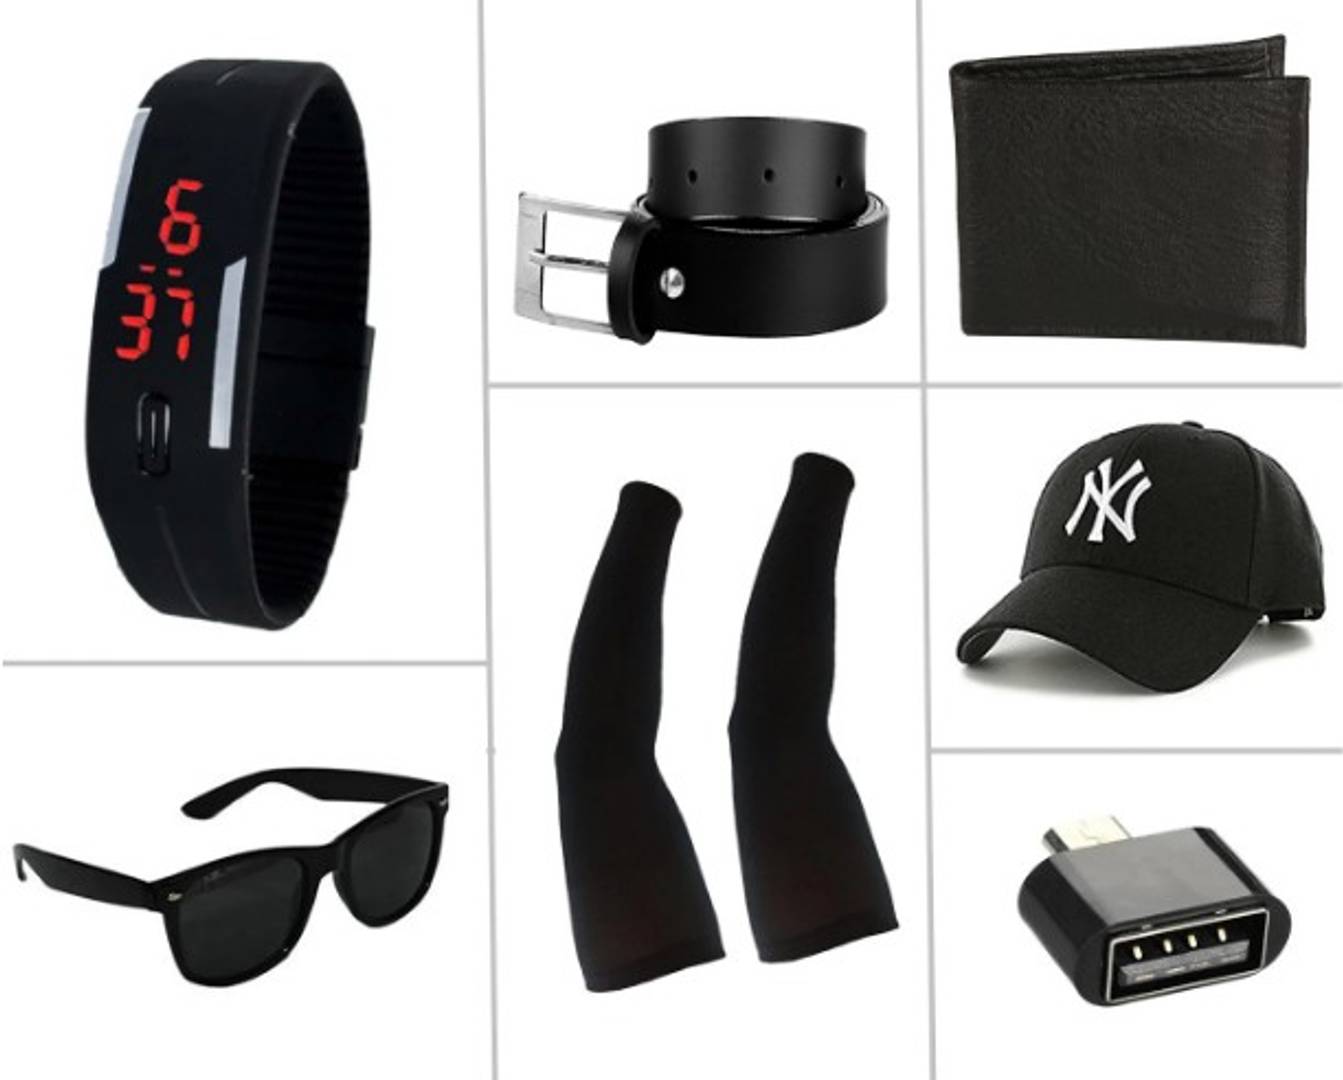 Combo Of Stylish Belt And Get LED Band, Wallet, Sunglass, Arm Sleeves, Black Cap & OTG